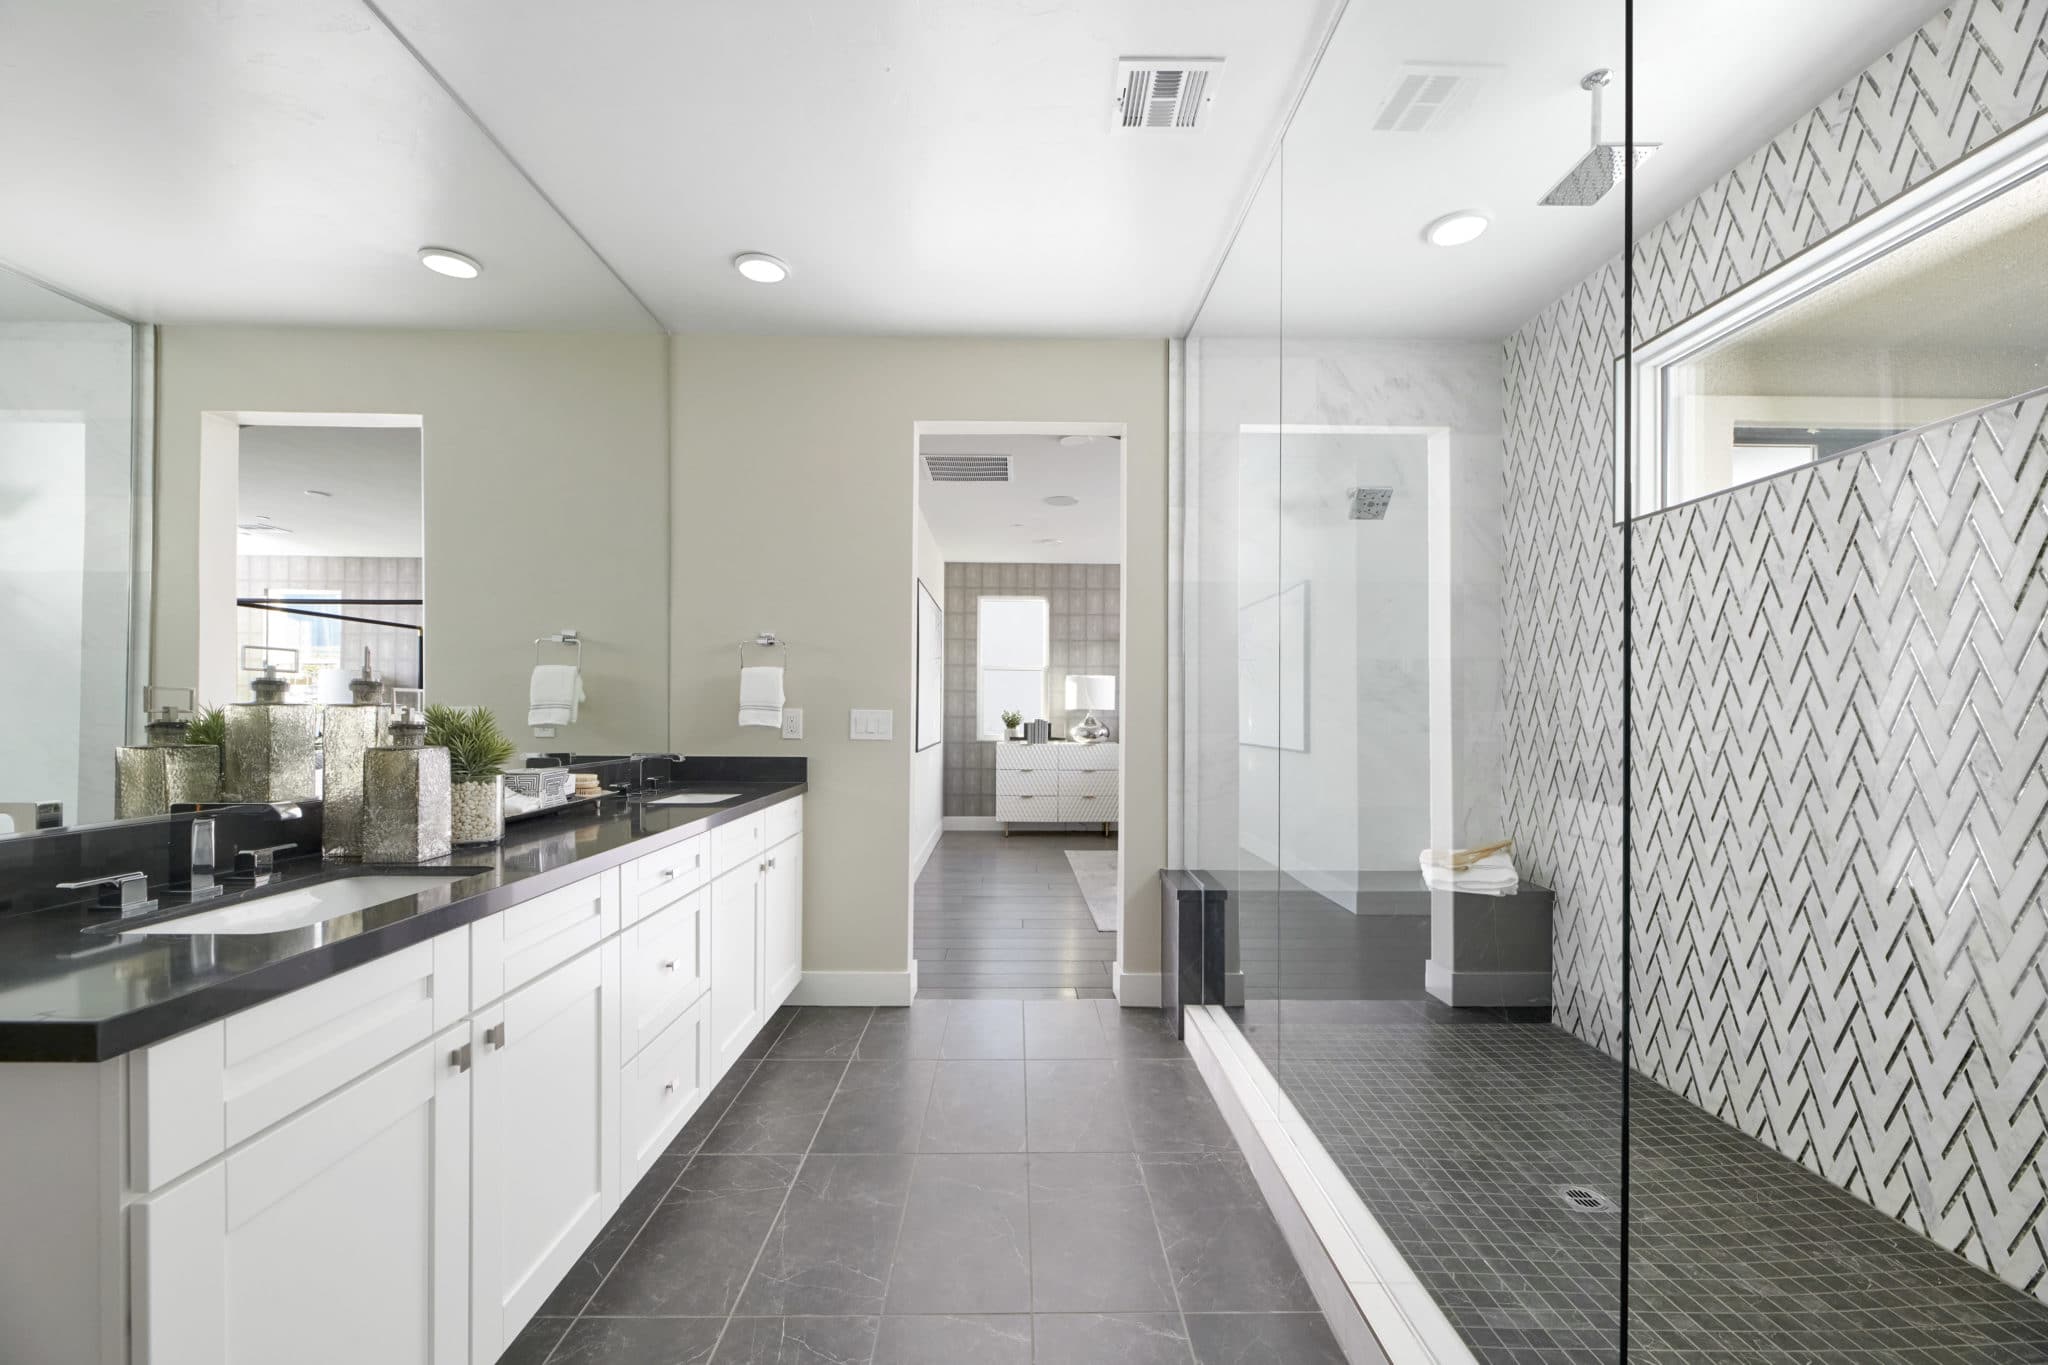 Primary Bathroom of Plan 4 at Kings Canyon by Tri Pointe Homes